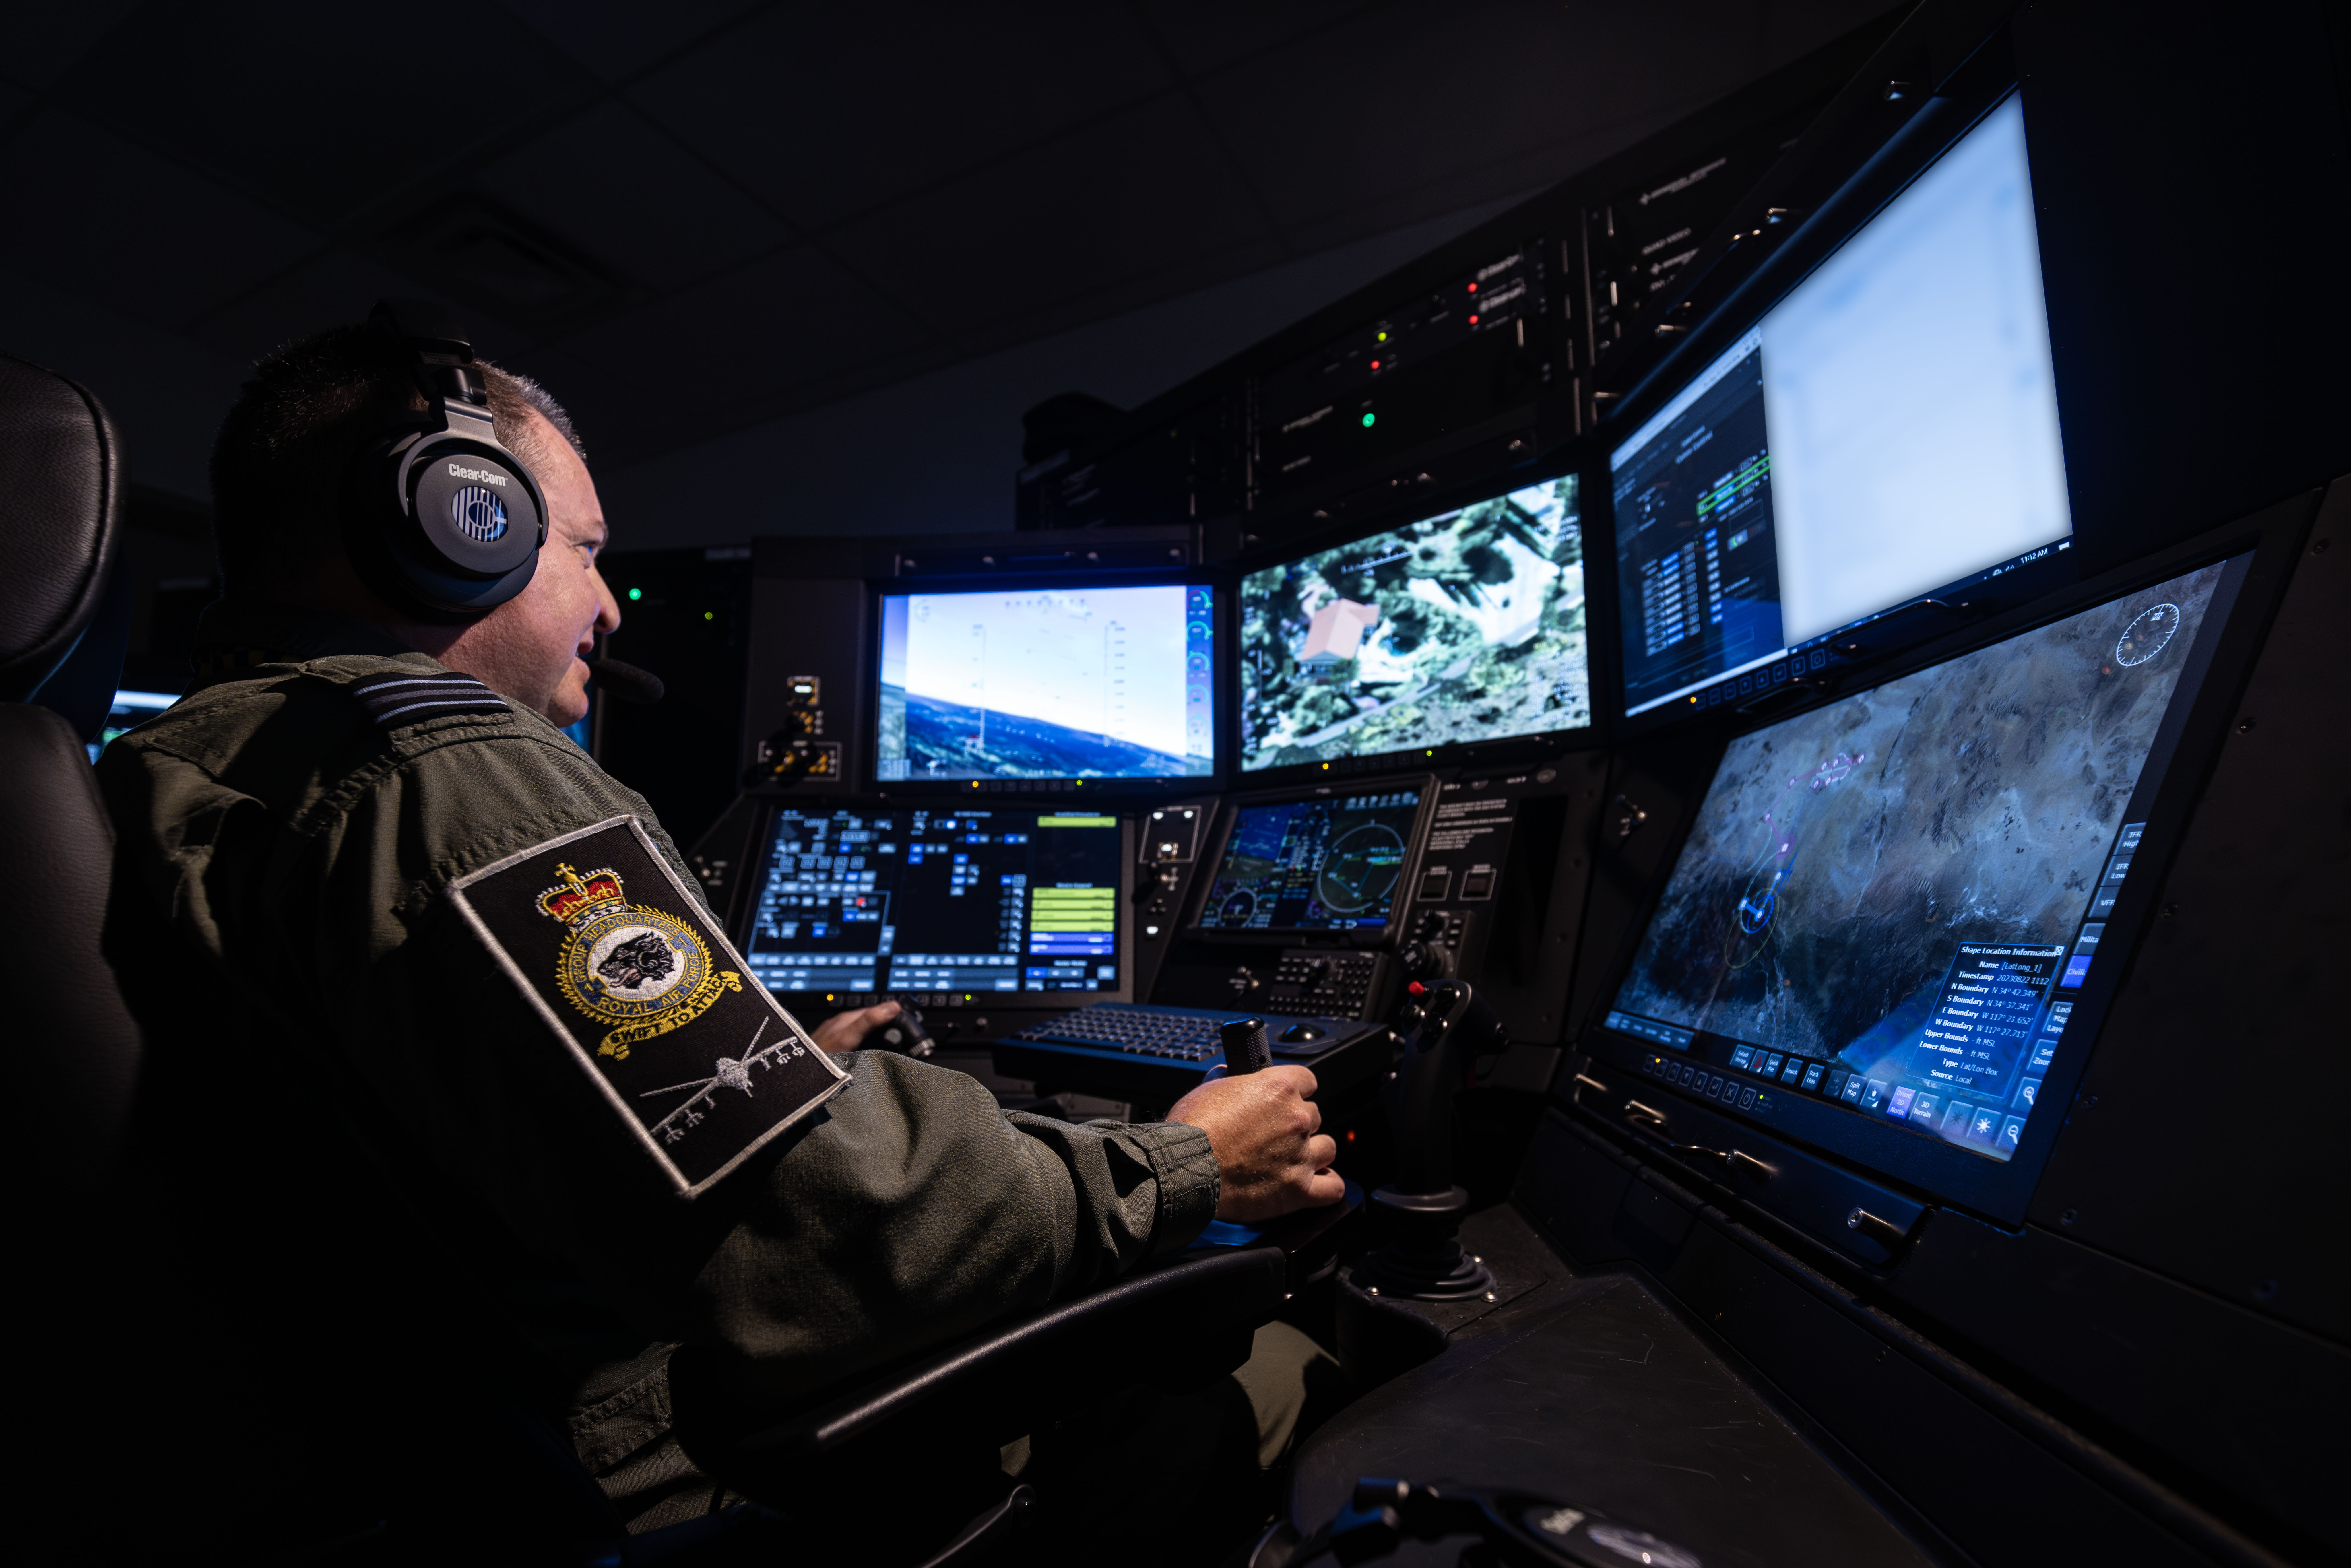 Protector_54_Sqn_Instructor_Operating_Course_on_Simulator_Aug_2023_Original_Image_m30257.jpg